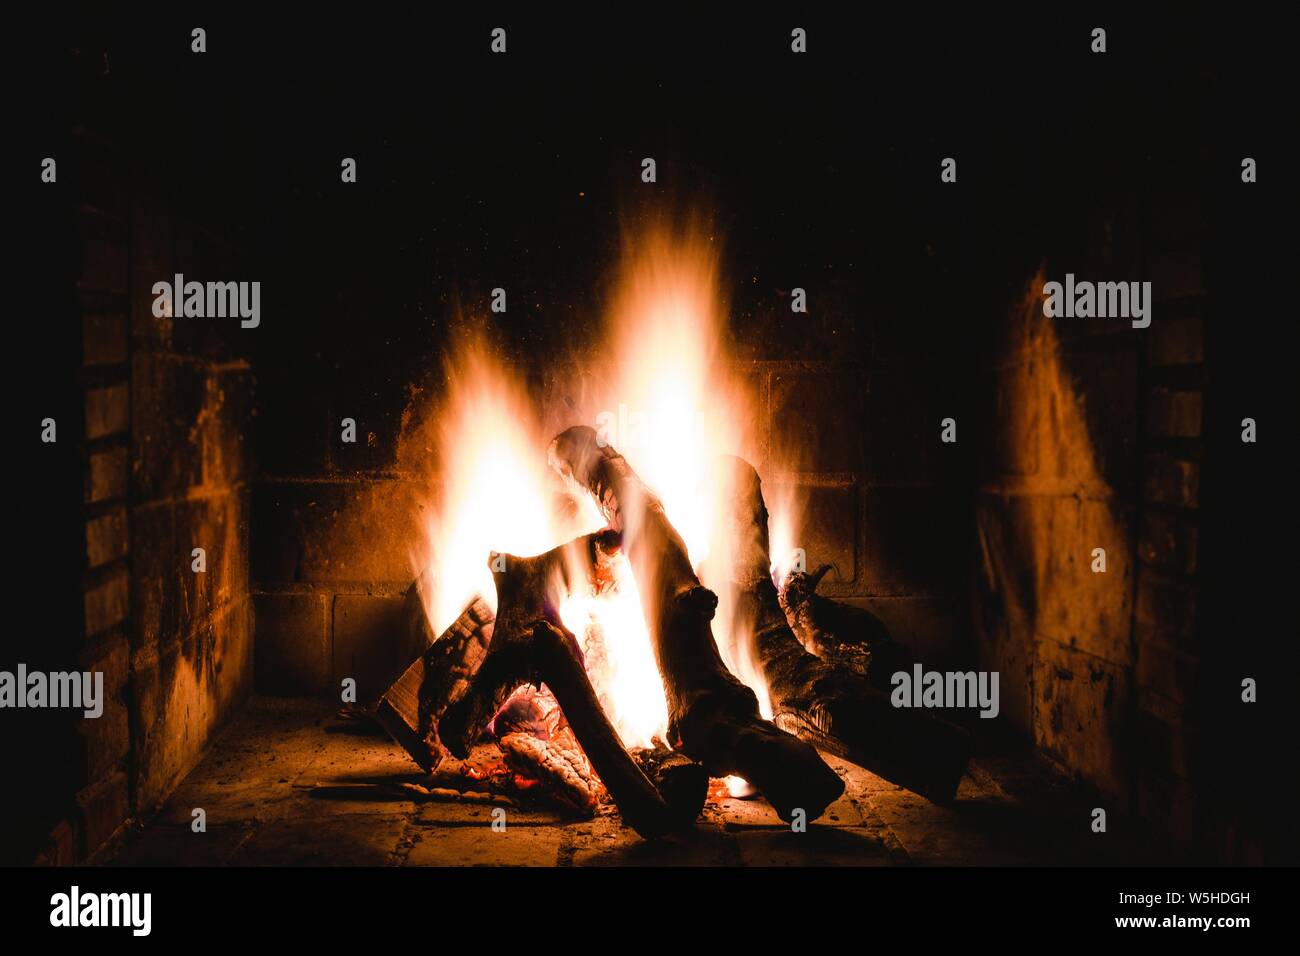 Unique shot of an indoor flamy fireplace Stock Photo